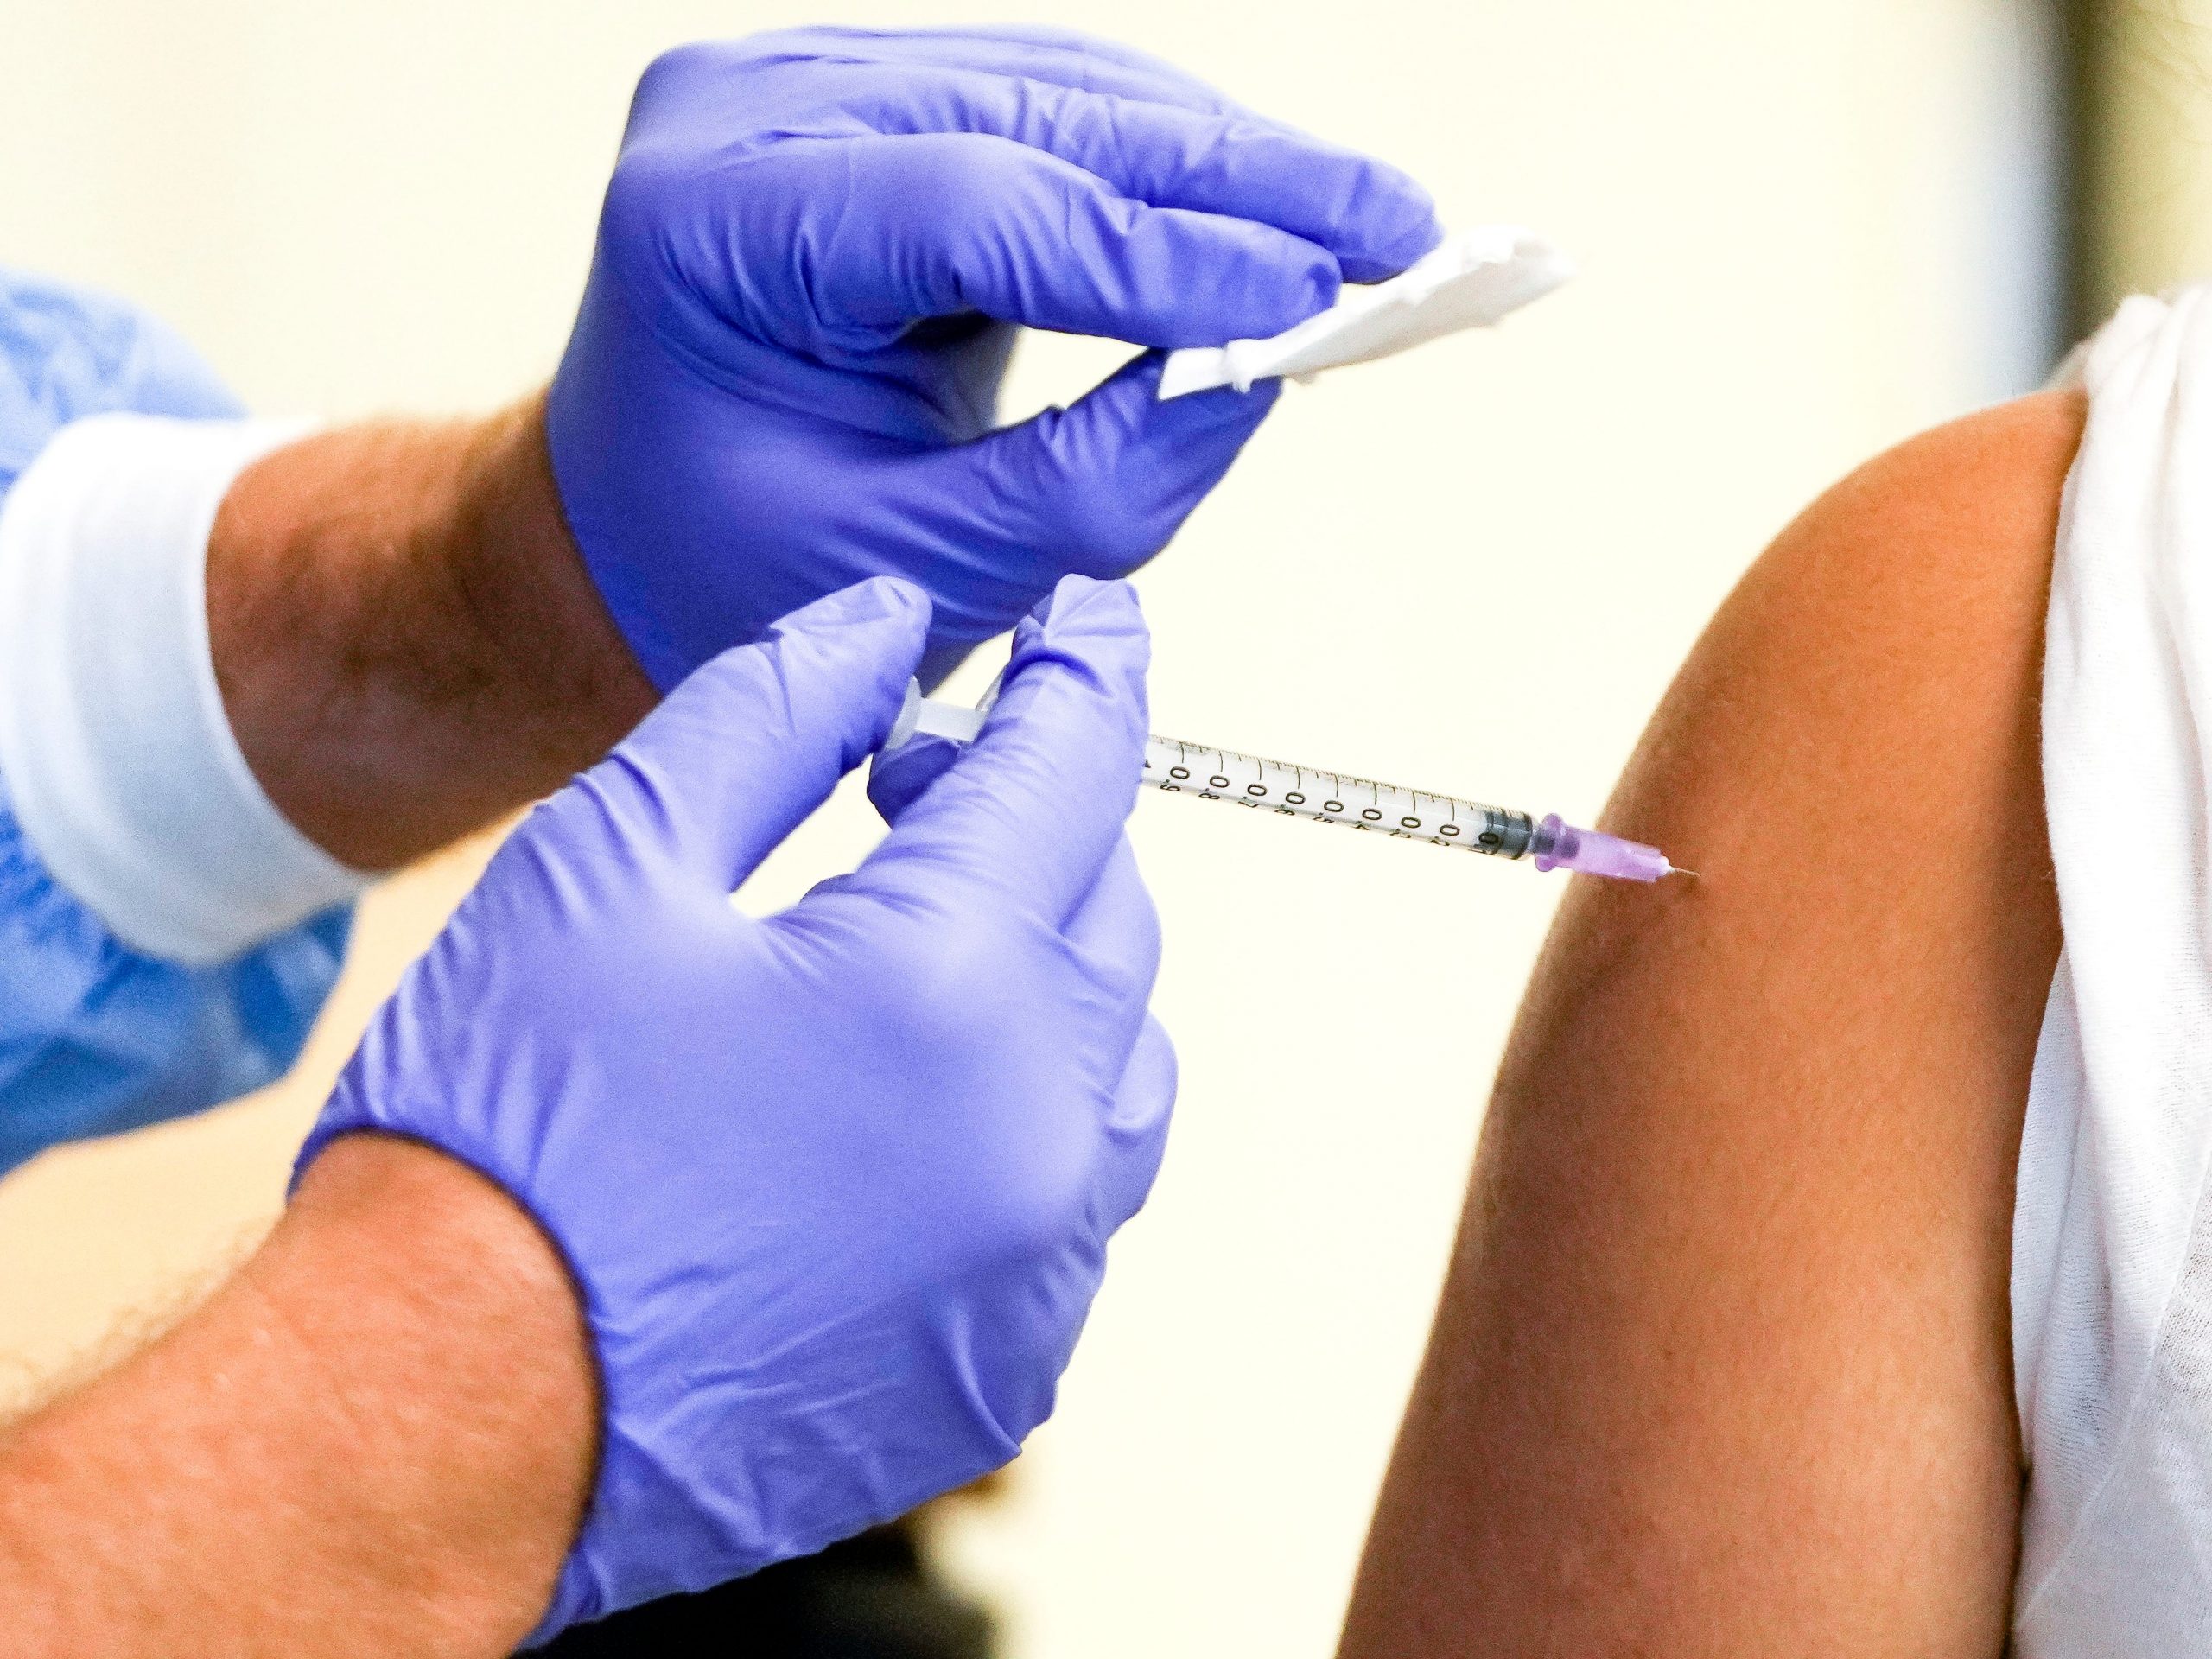 Doctors gives a person a COVID-19 vaccine shot.